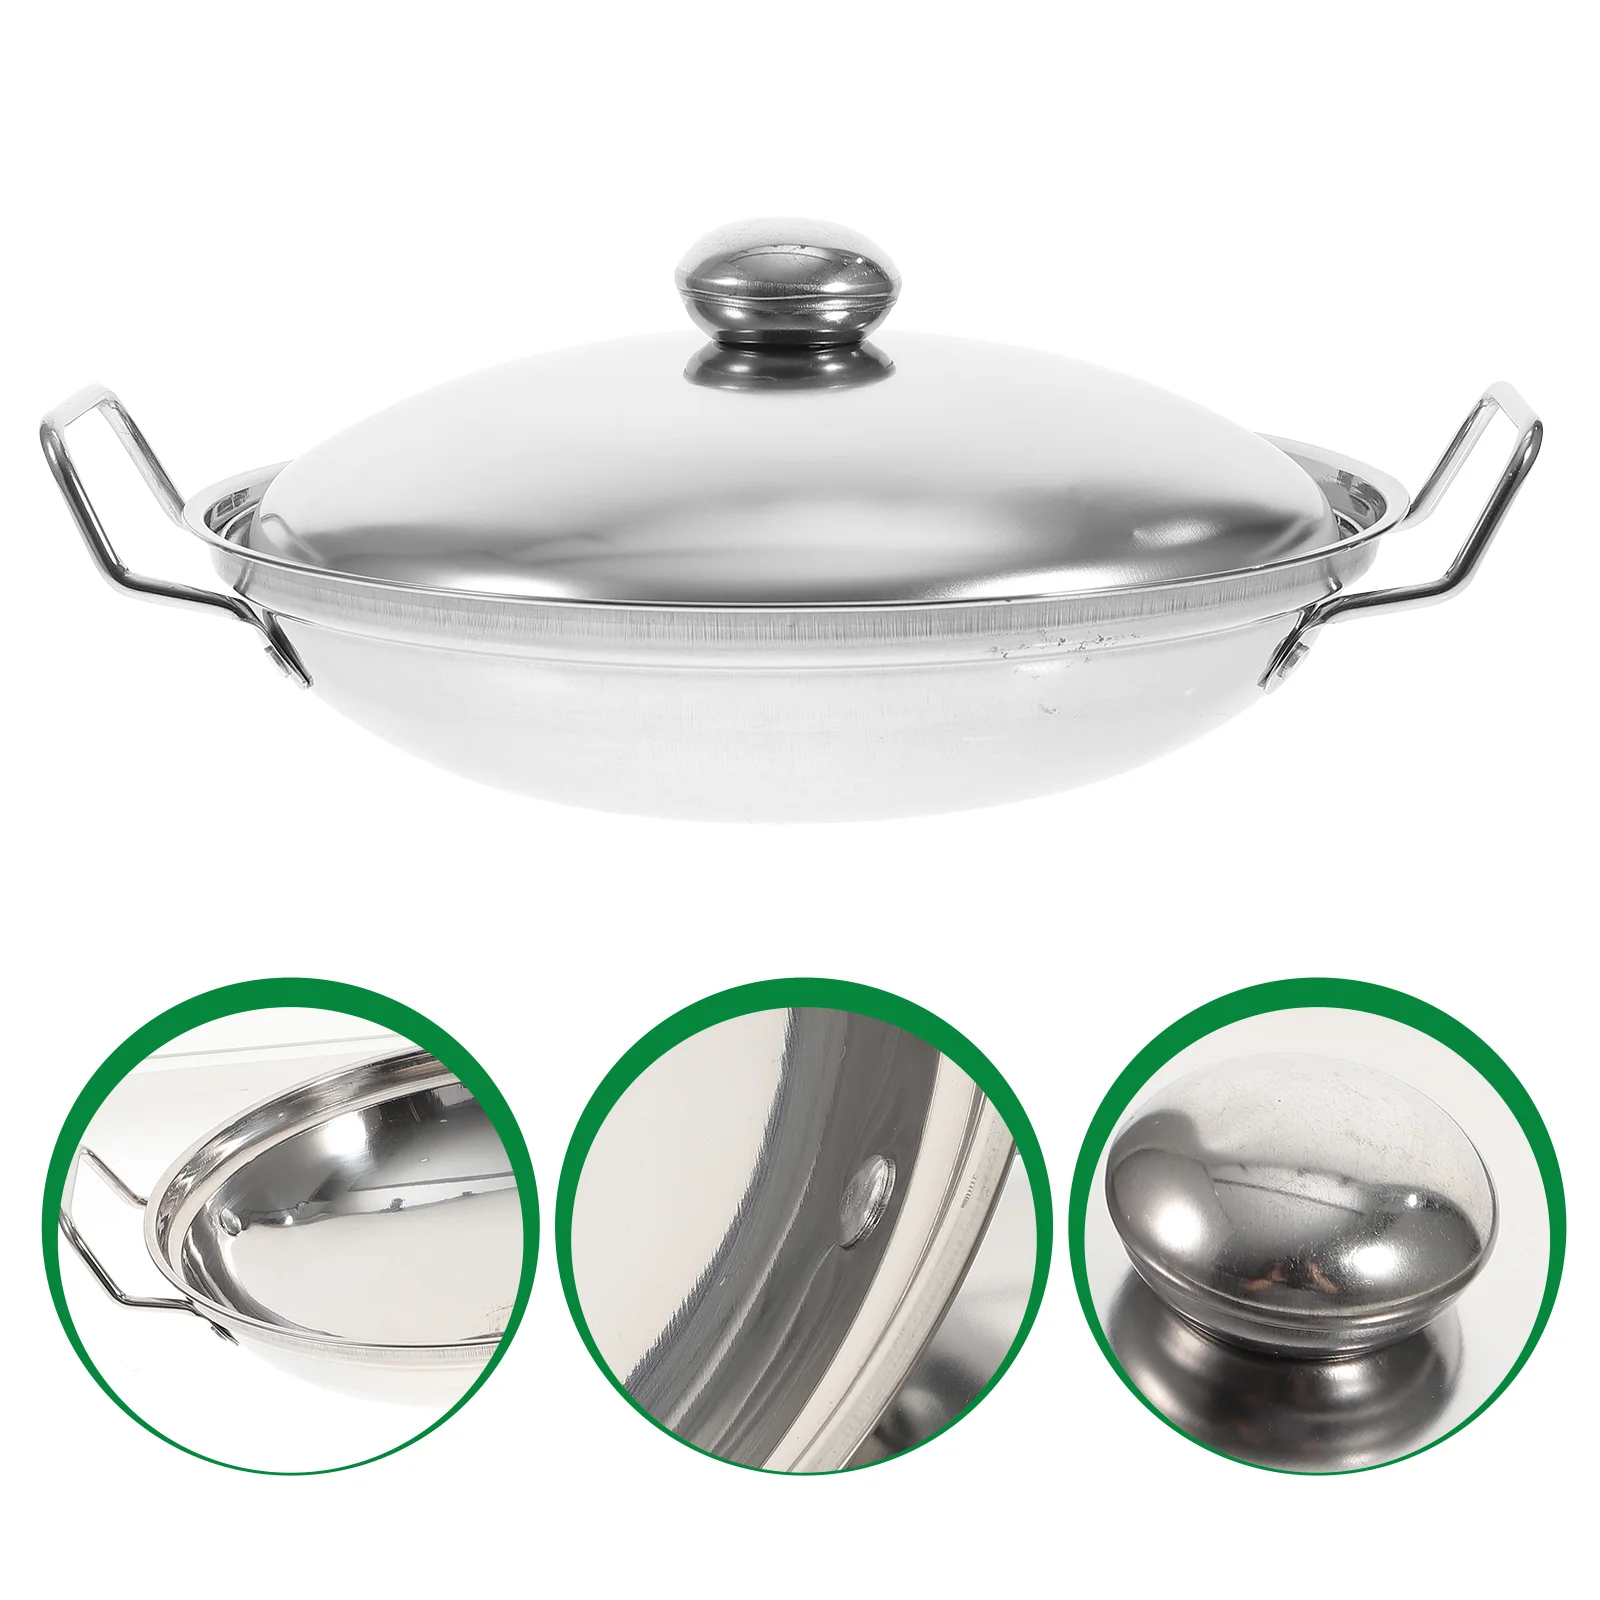 

Pot Pan Wok Cooking Hot Stove Stainless Steel Gas Fry Stir Kitchen Soup Sauce Pasta Noodle Omelette Cooker Frying Cookware